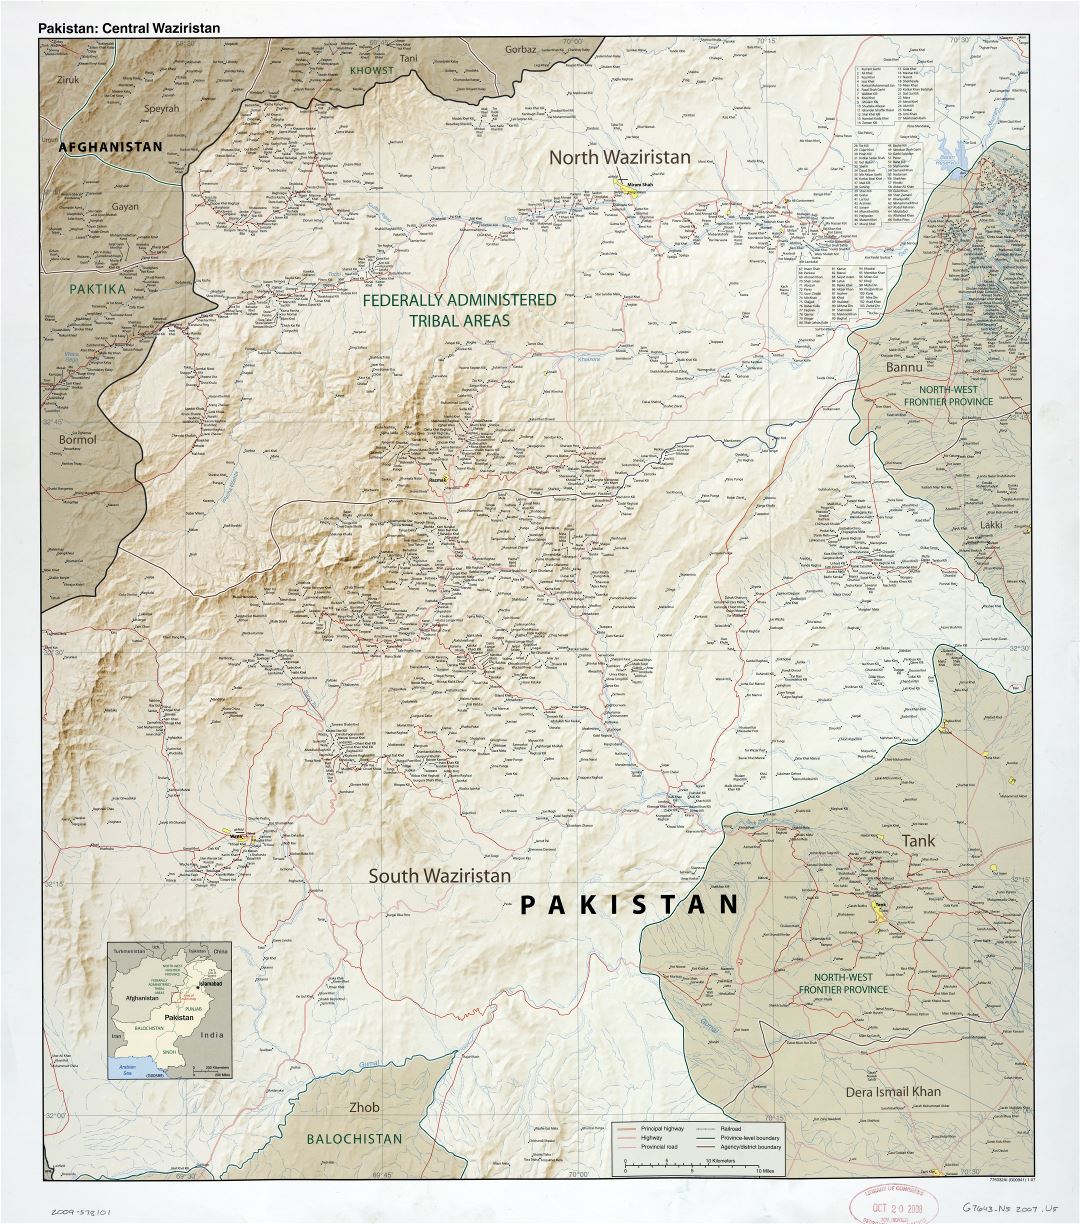 Large scale detailed map of Pakistan (Central Waziristan) with relief, roads, railroads, all cities and villages - 2007